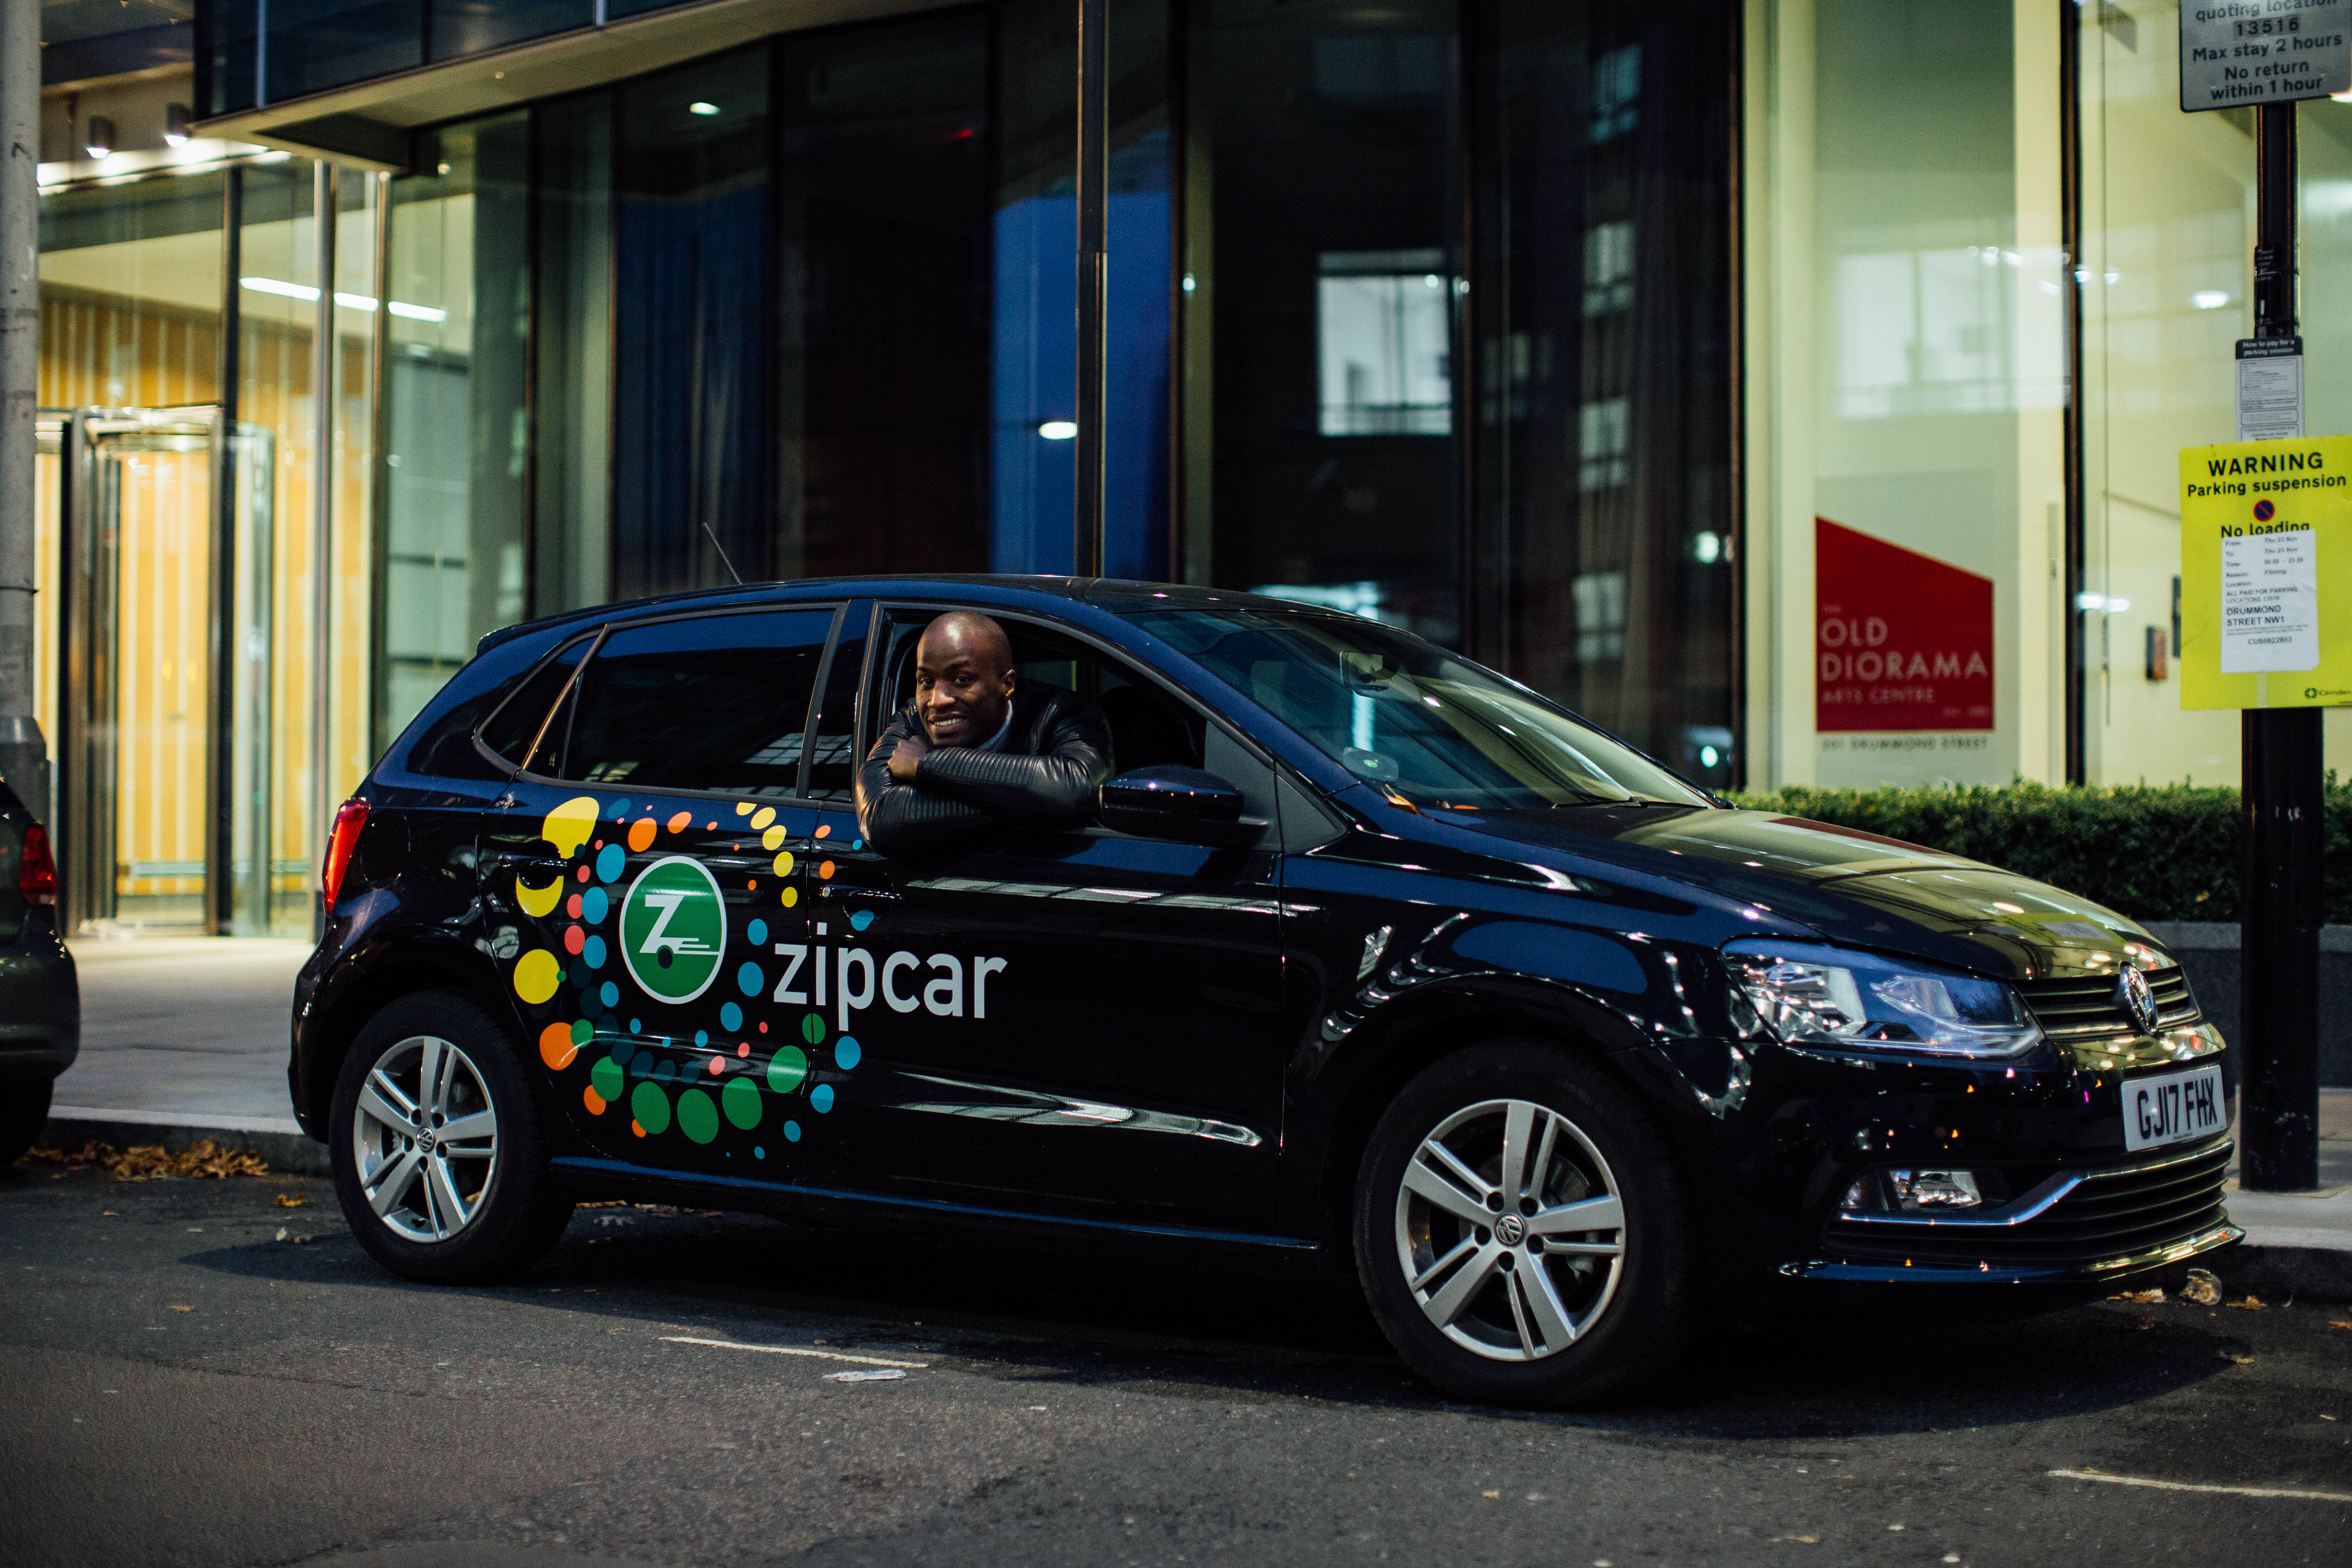 Get the Job done with Zipcar Flex in the city